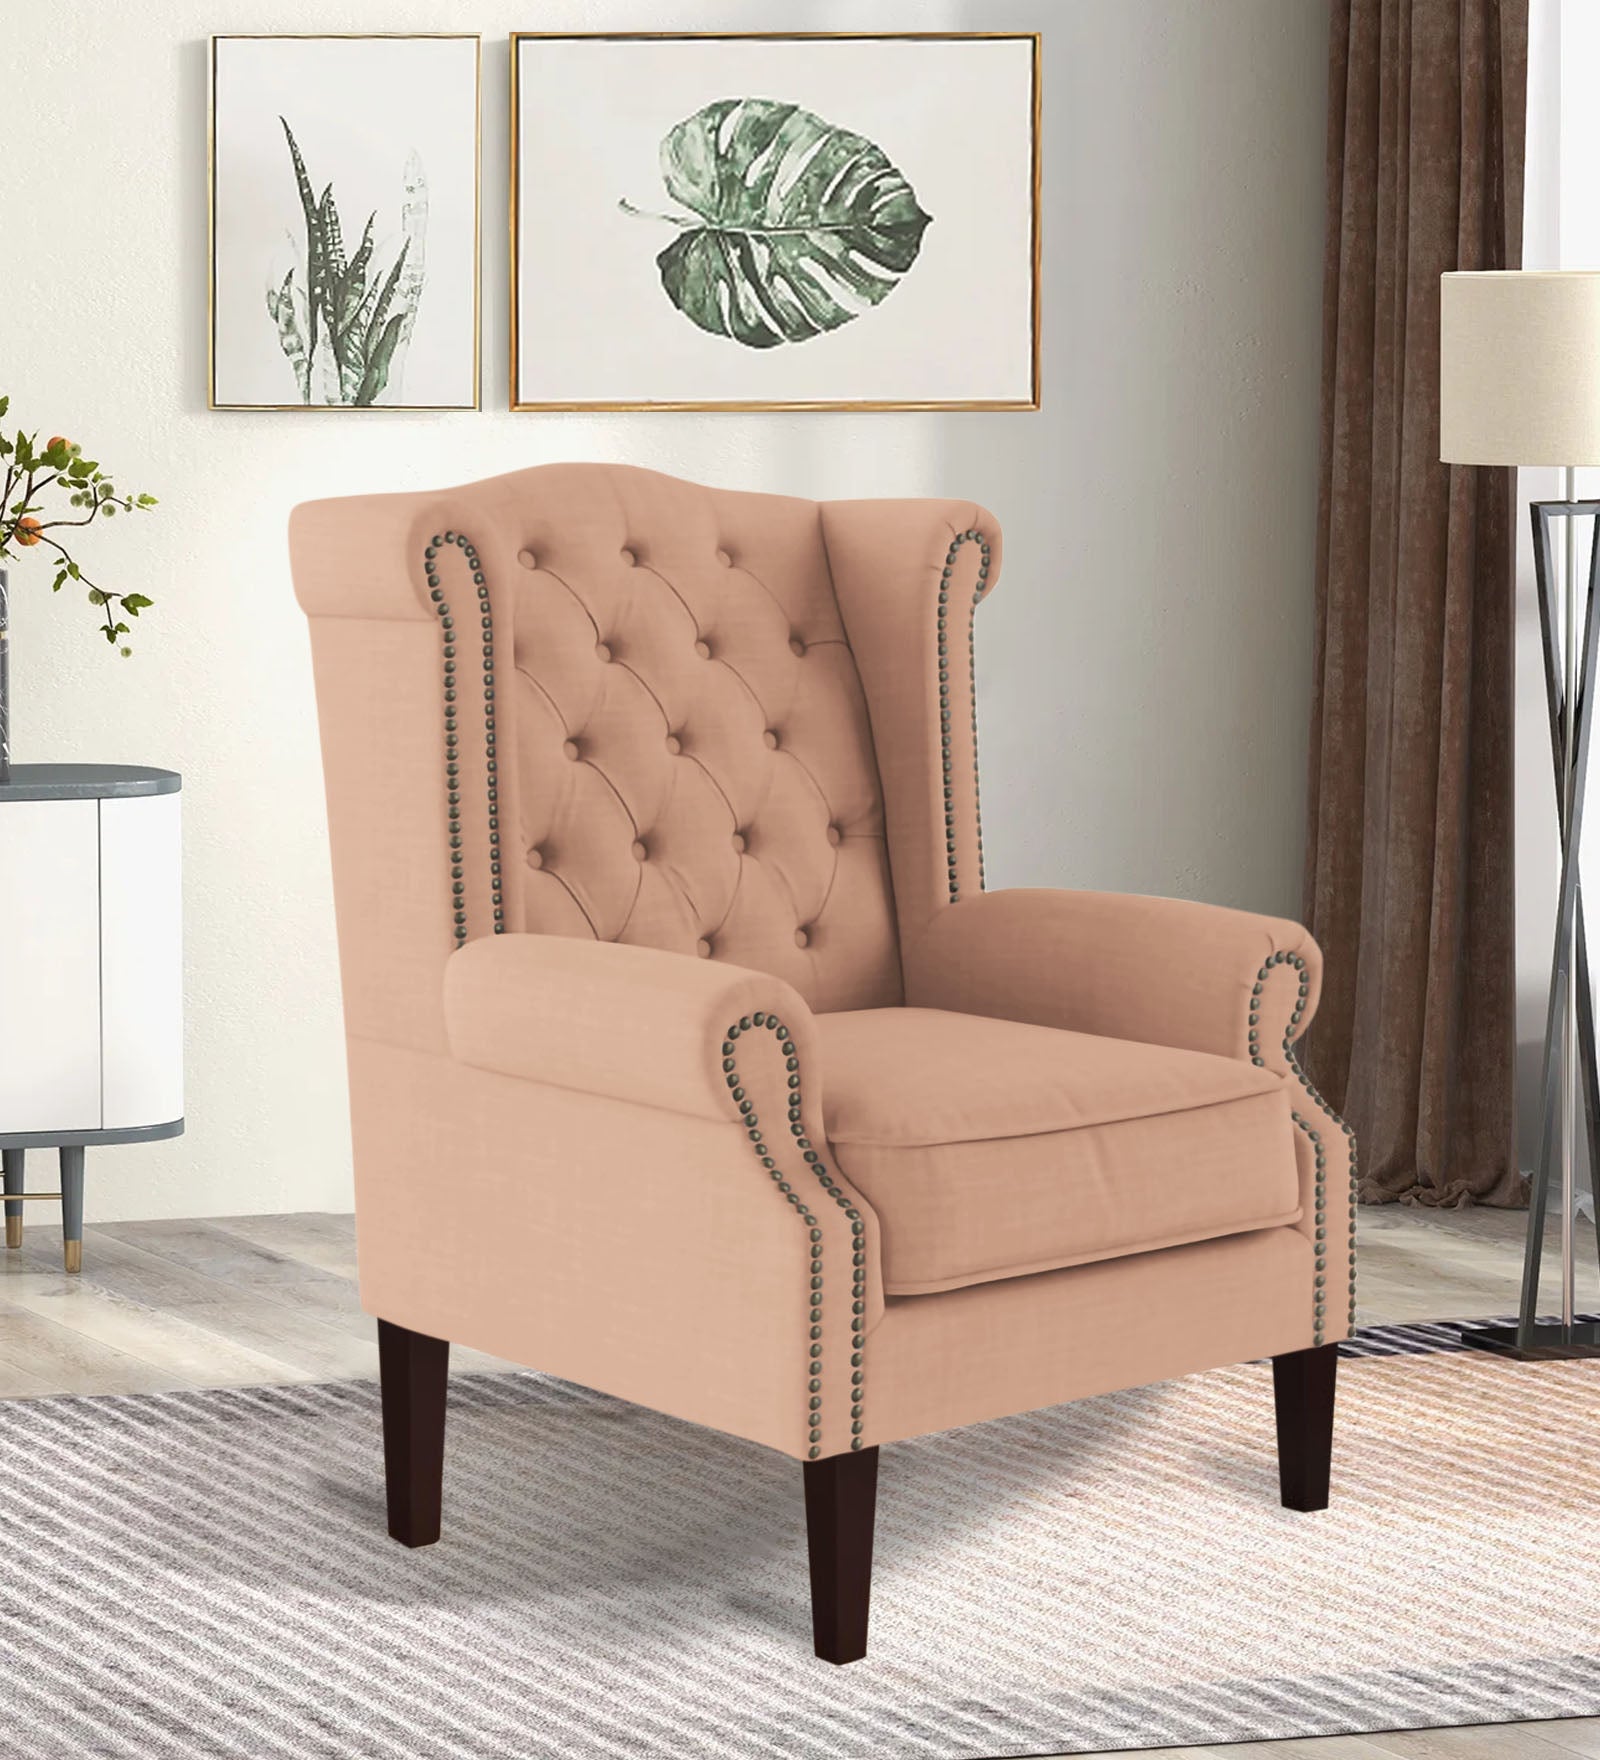 Nottage Fabric Wing Chair in Cosmic-beige Colour